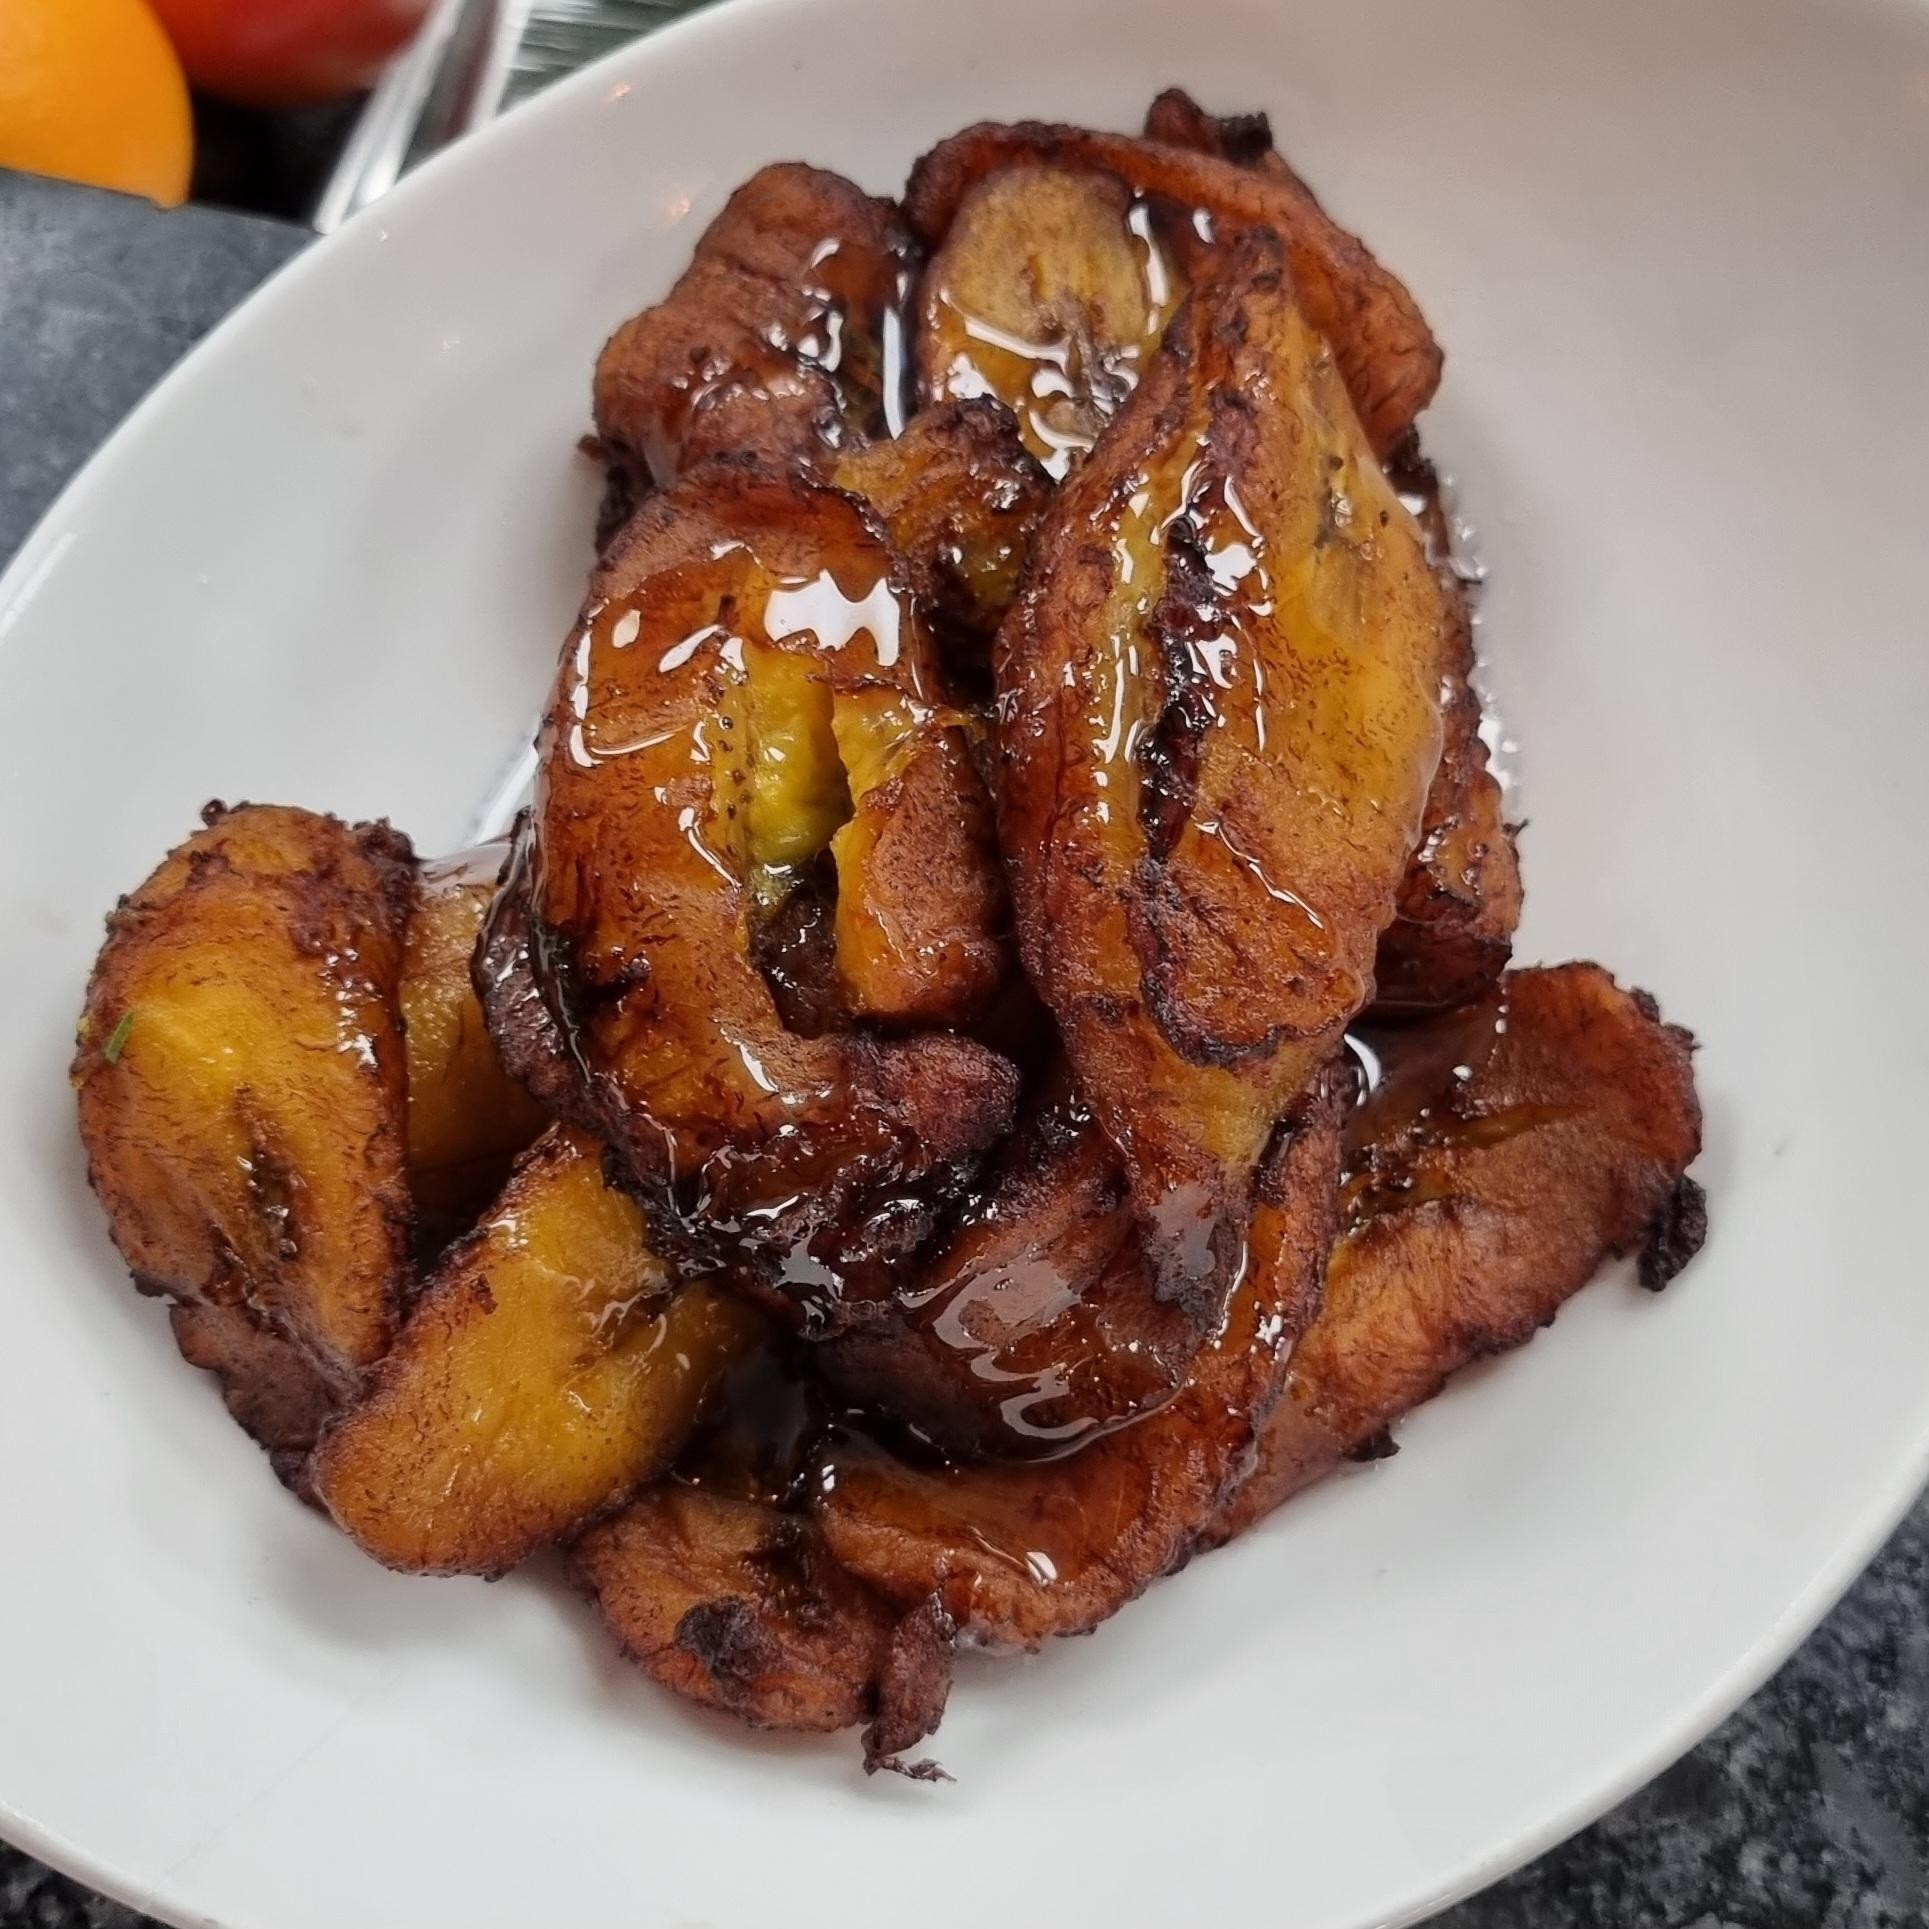 SIDE SWEET PLANTAINS